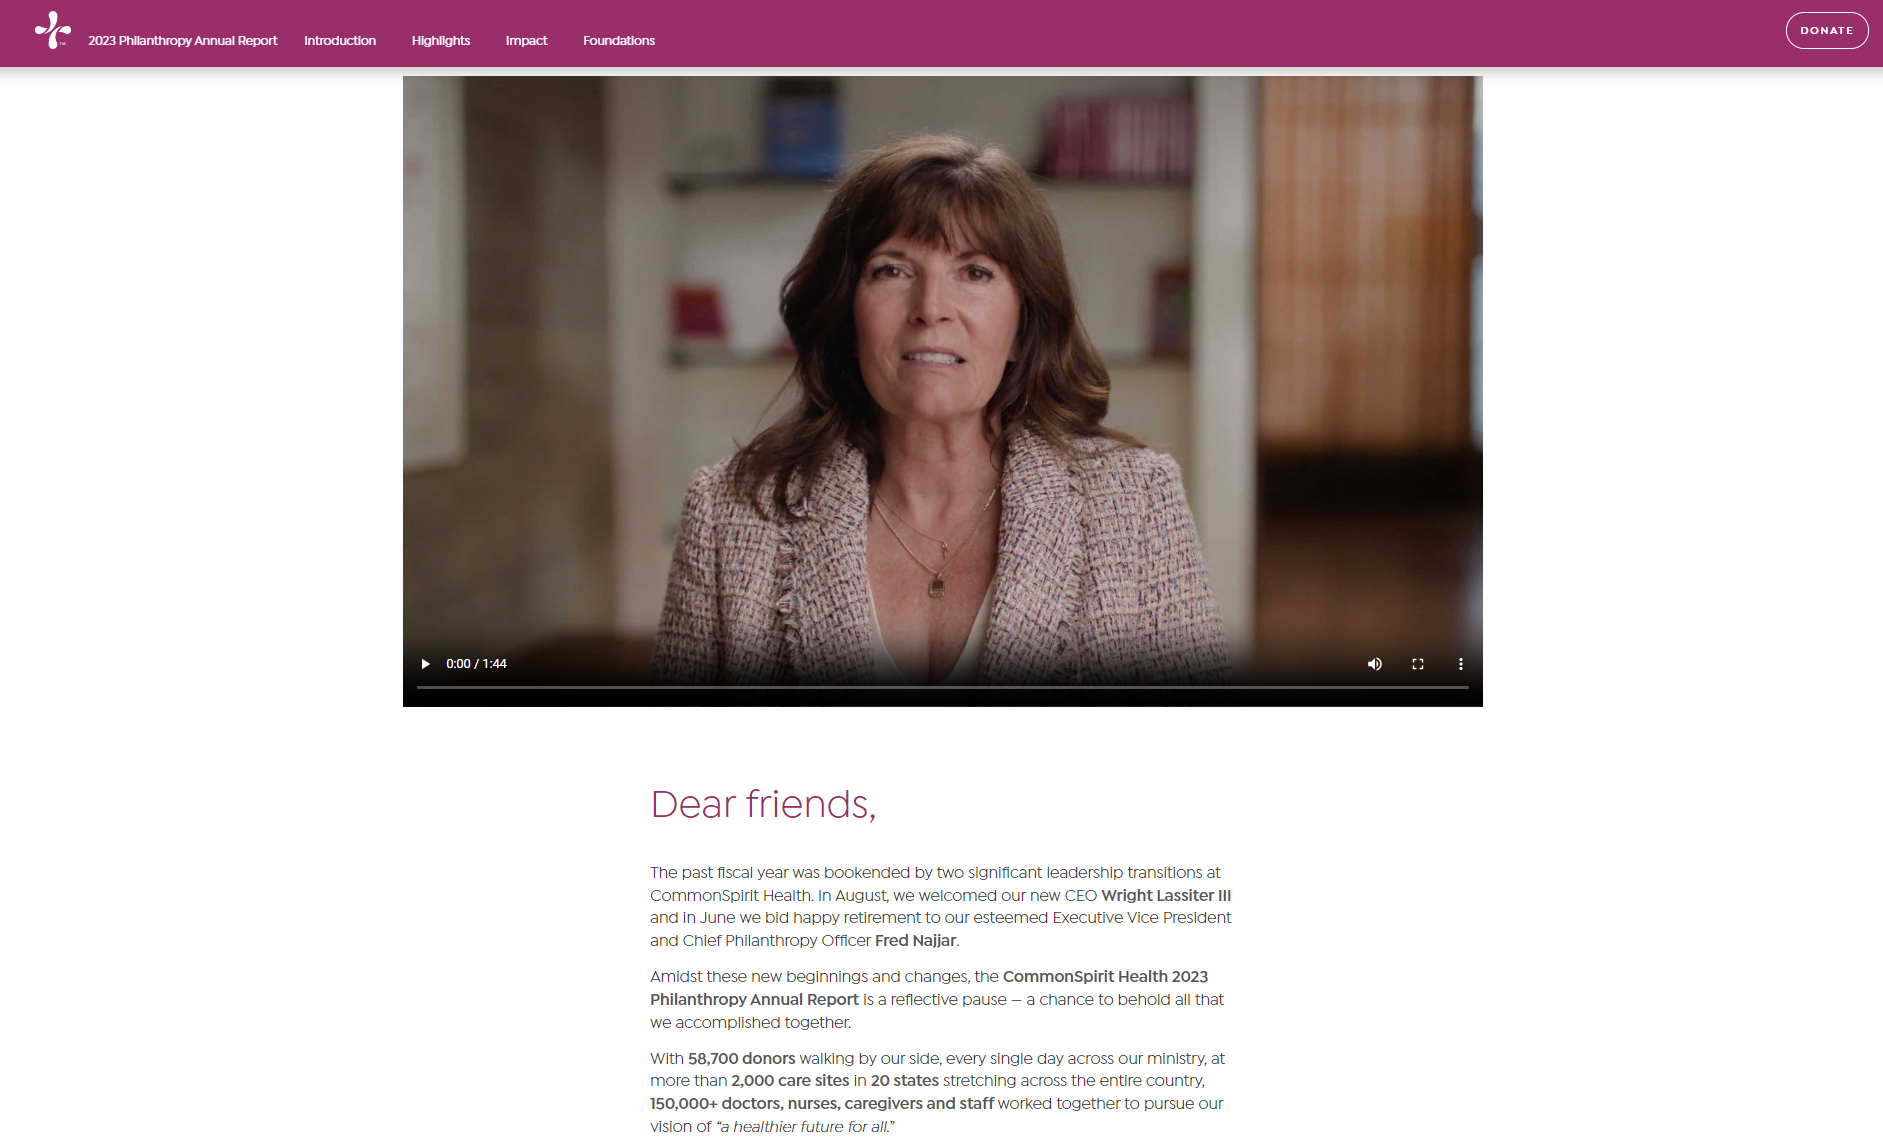 Screenshot of the 2023 annual report featuring a video from Nancy Bussani